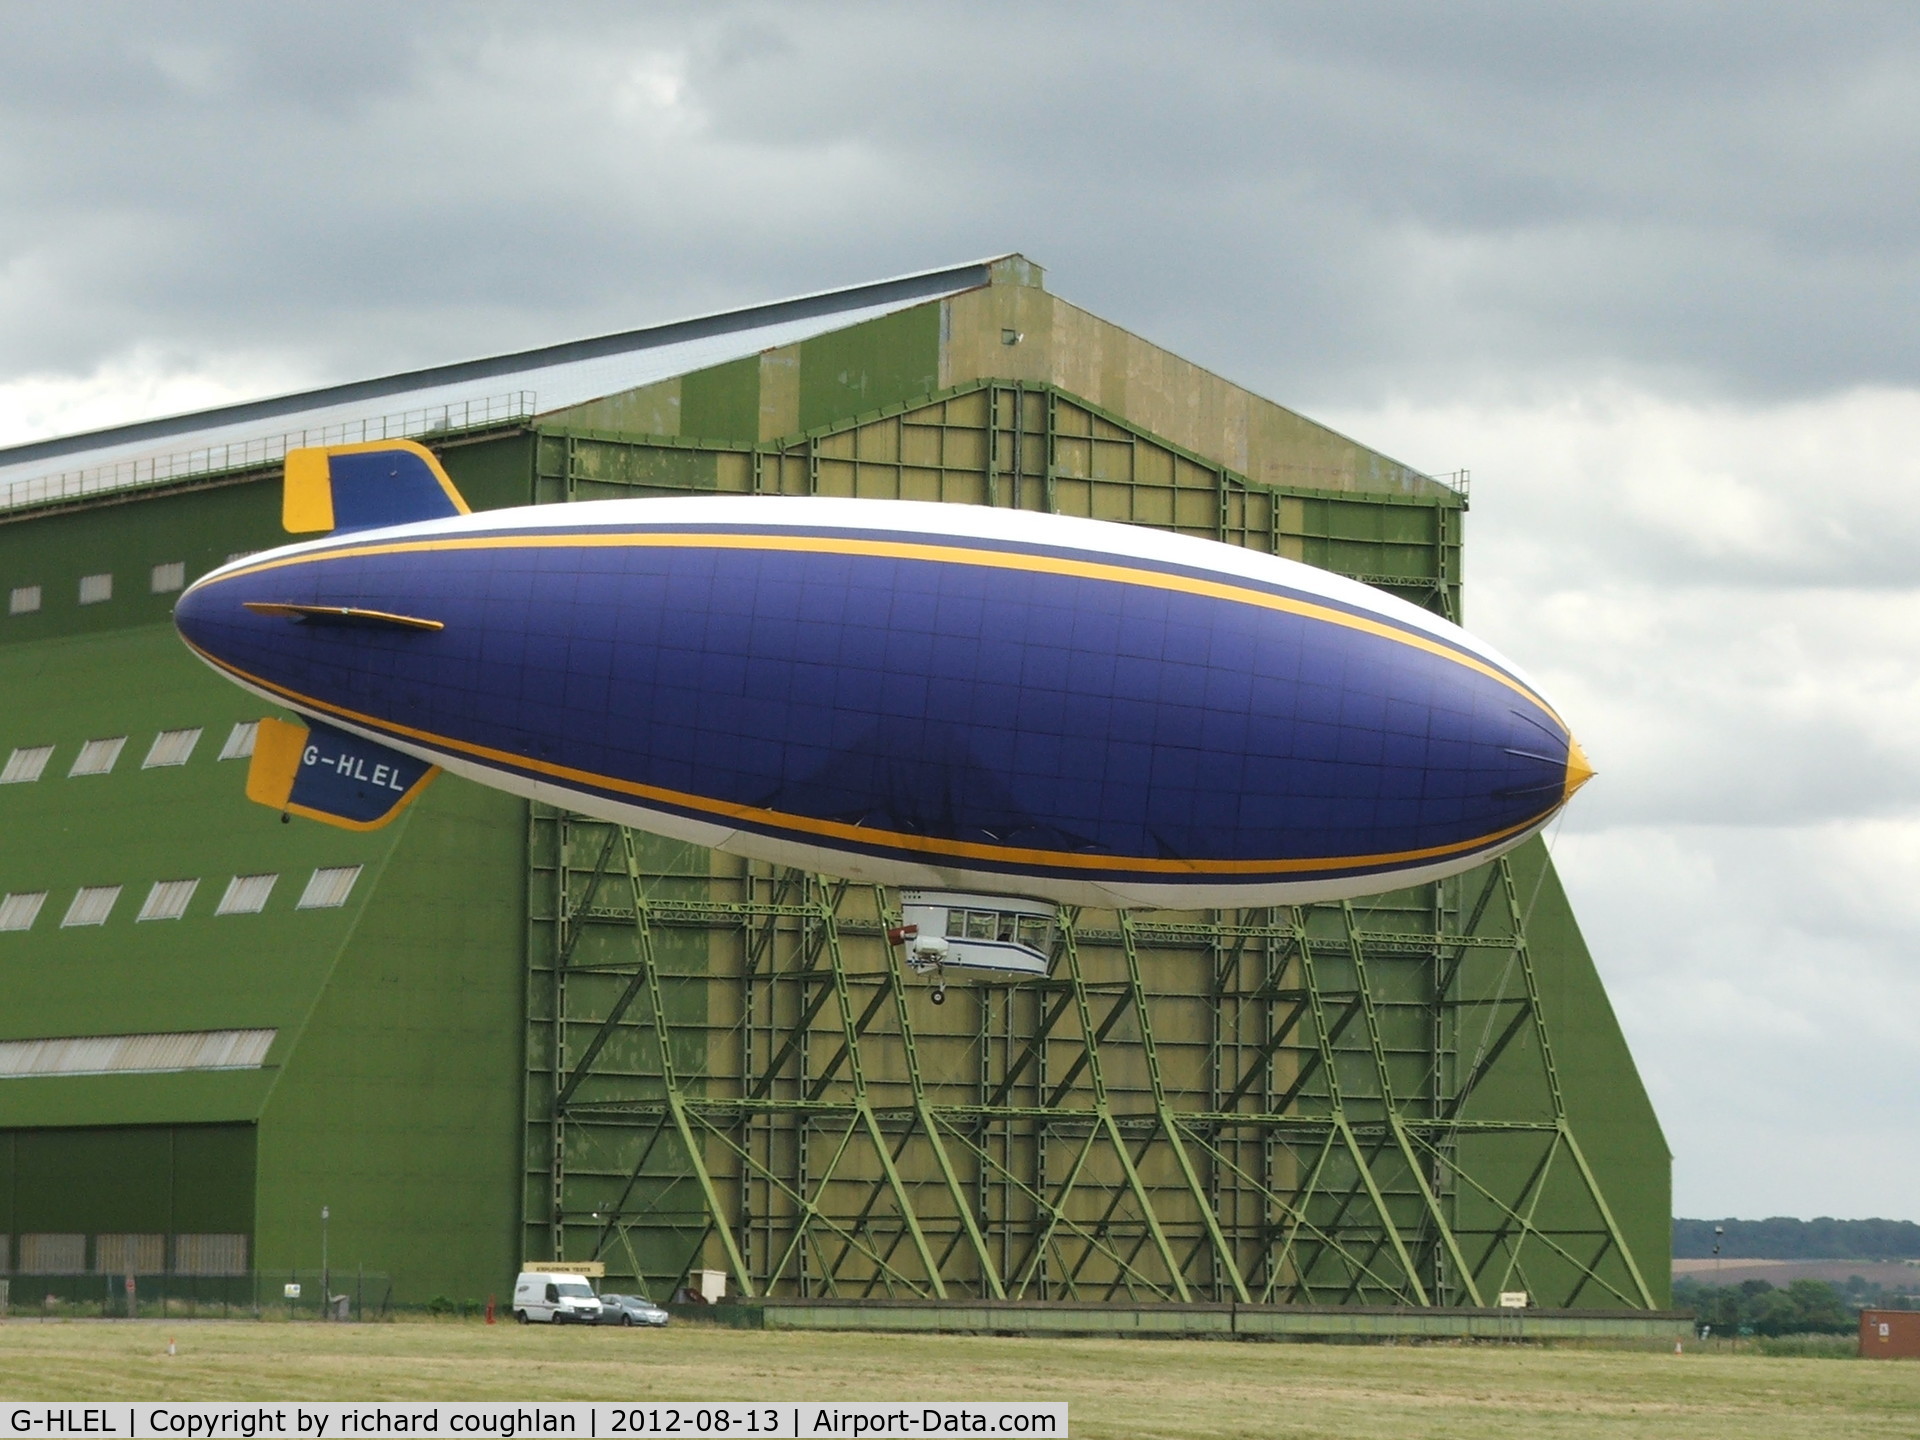 G-HLEL, 1995 American Blimp Corp A-60+ C/N 10, at Cardington hangers without Goodyear branding yesterday